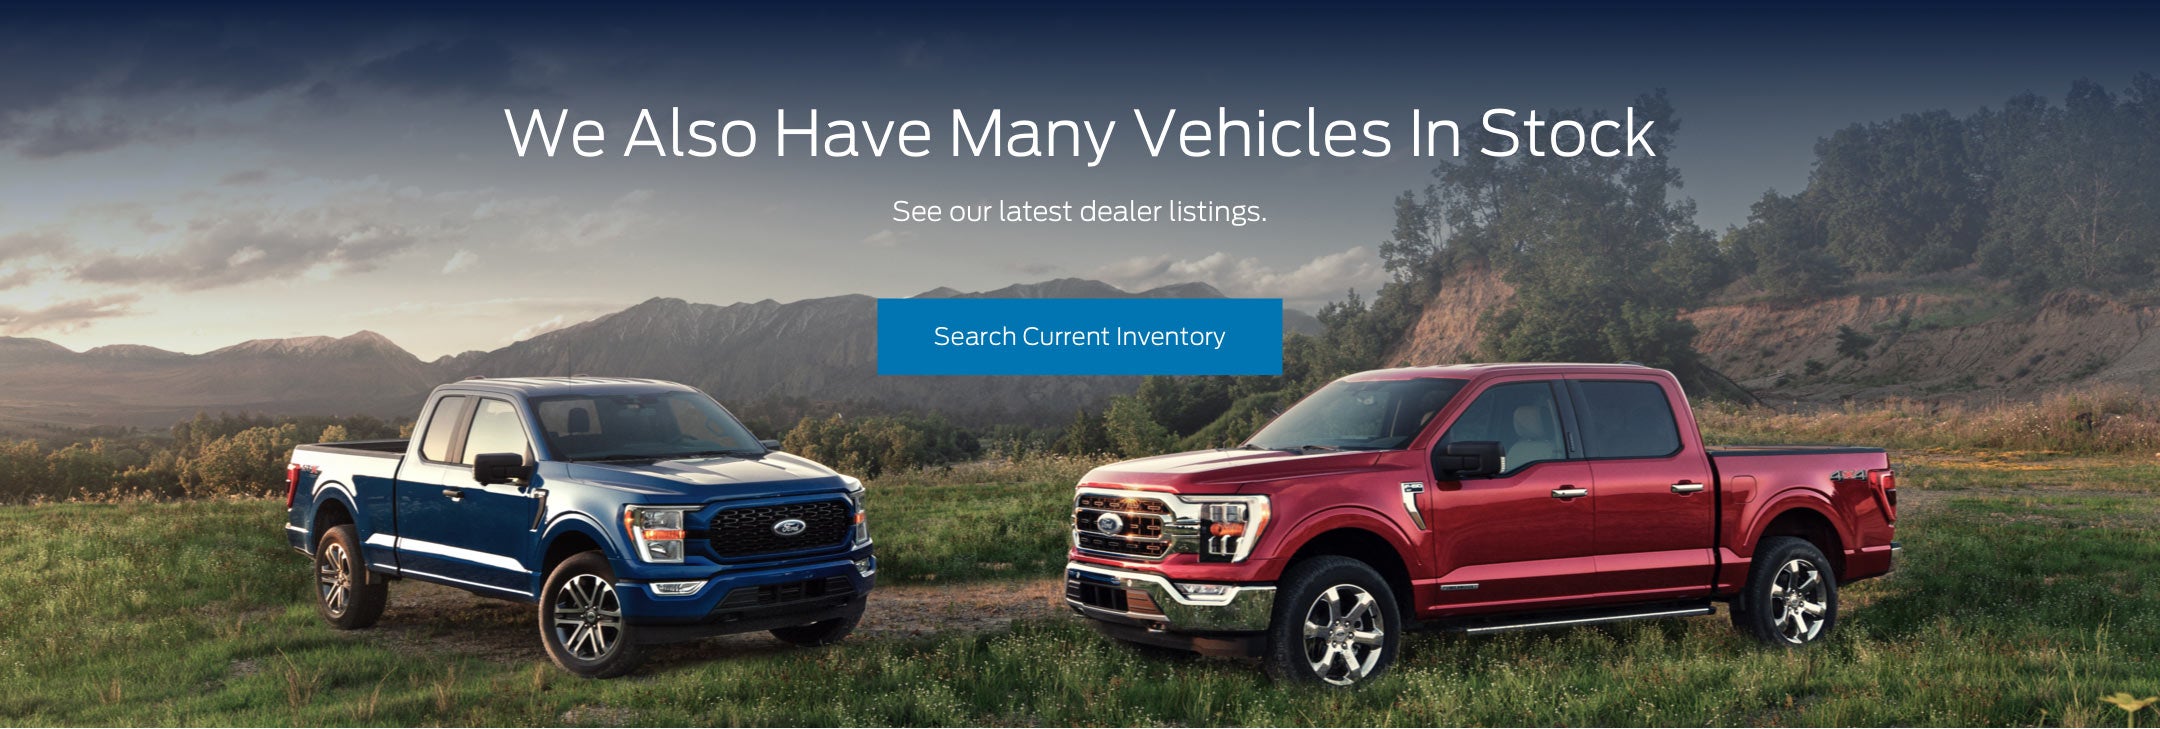 Ford vehicles in stock | LaFontaine Ford Flushing in Flushing MI